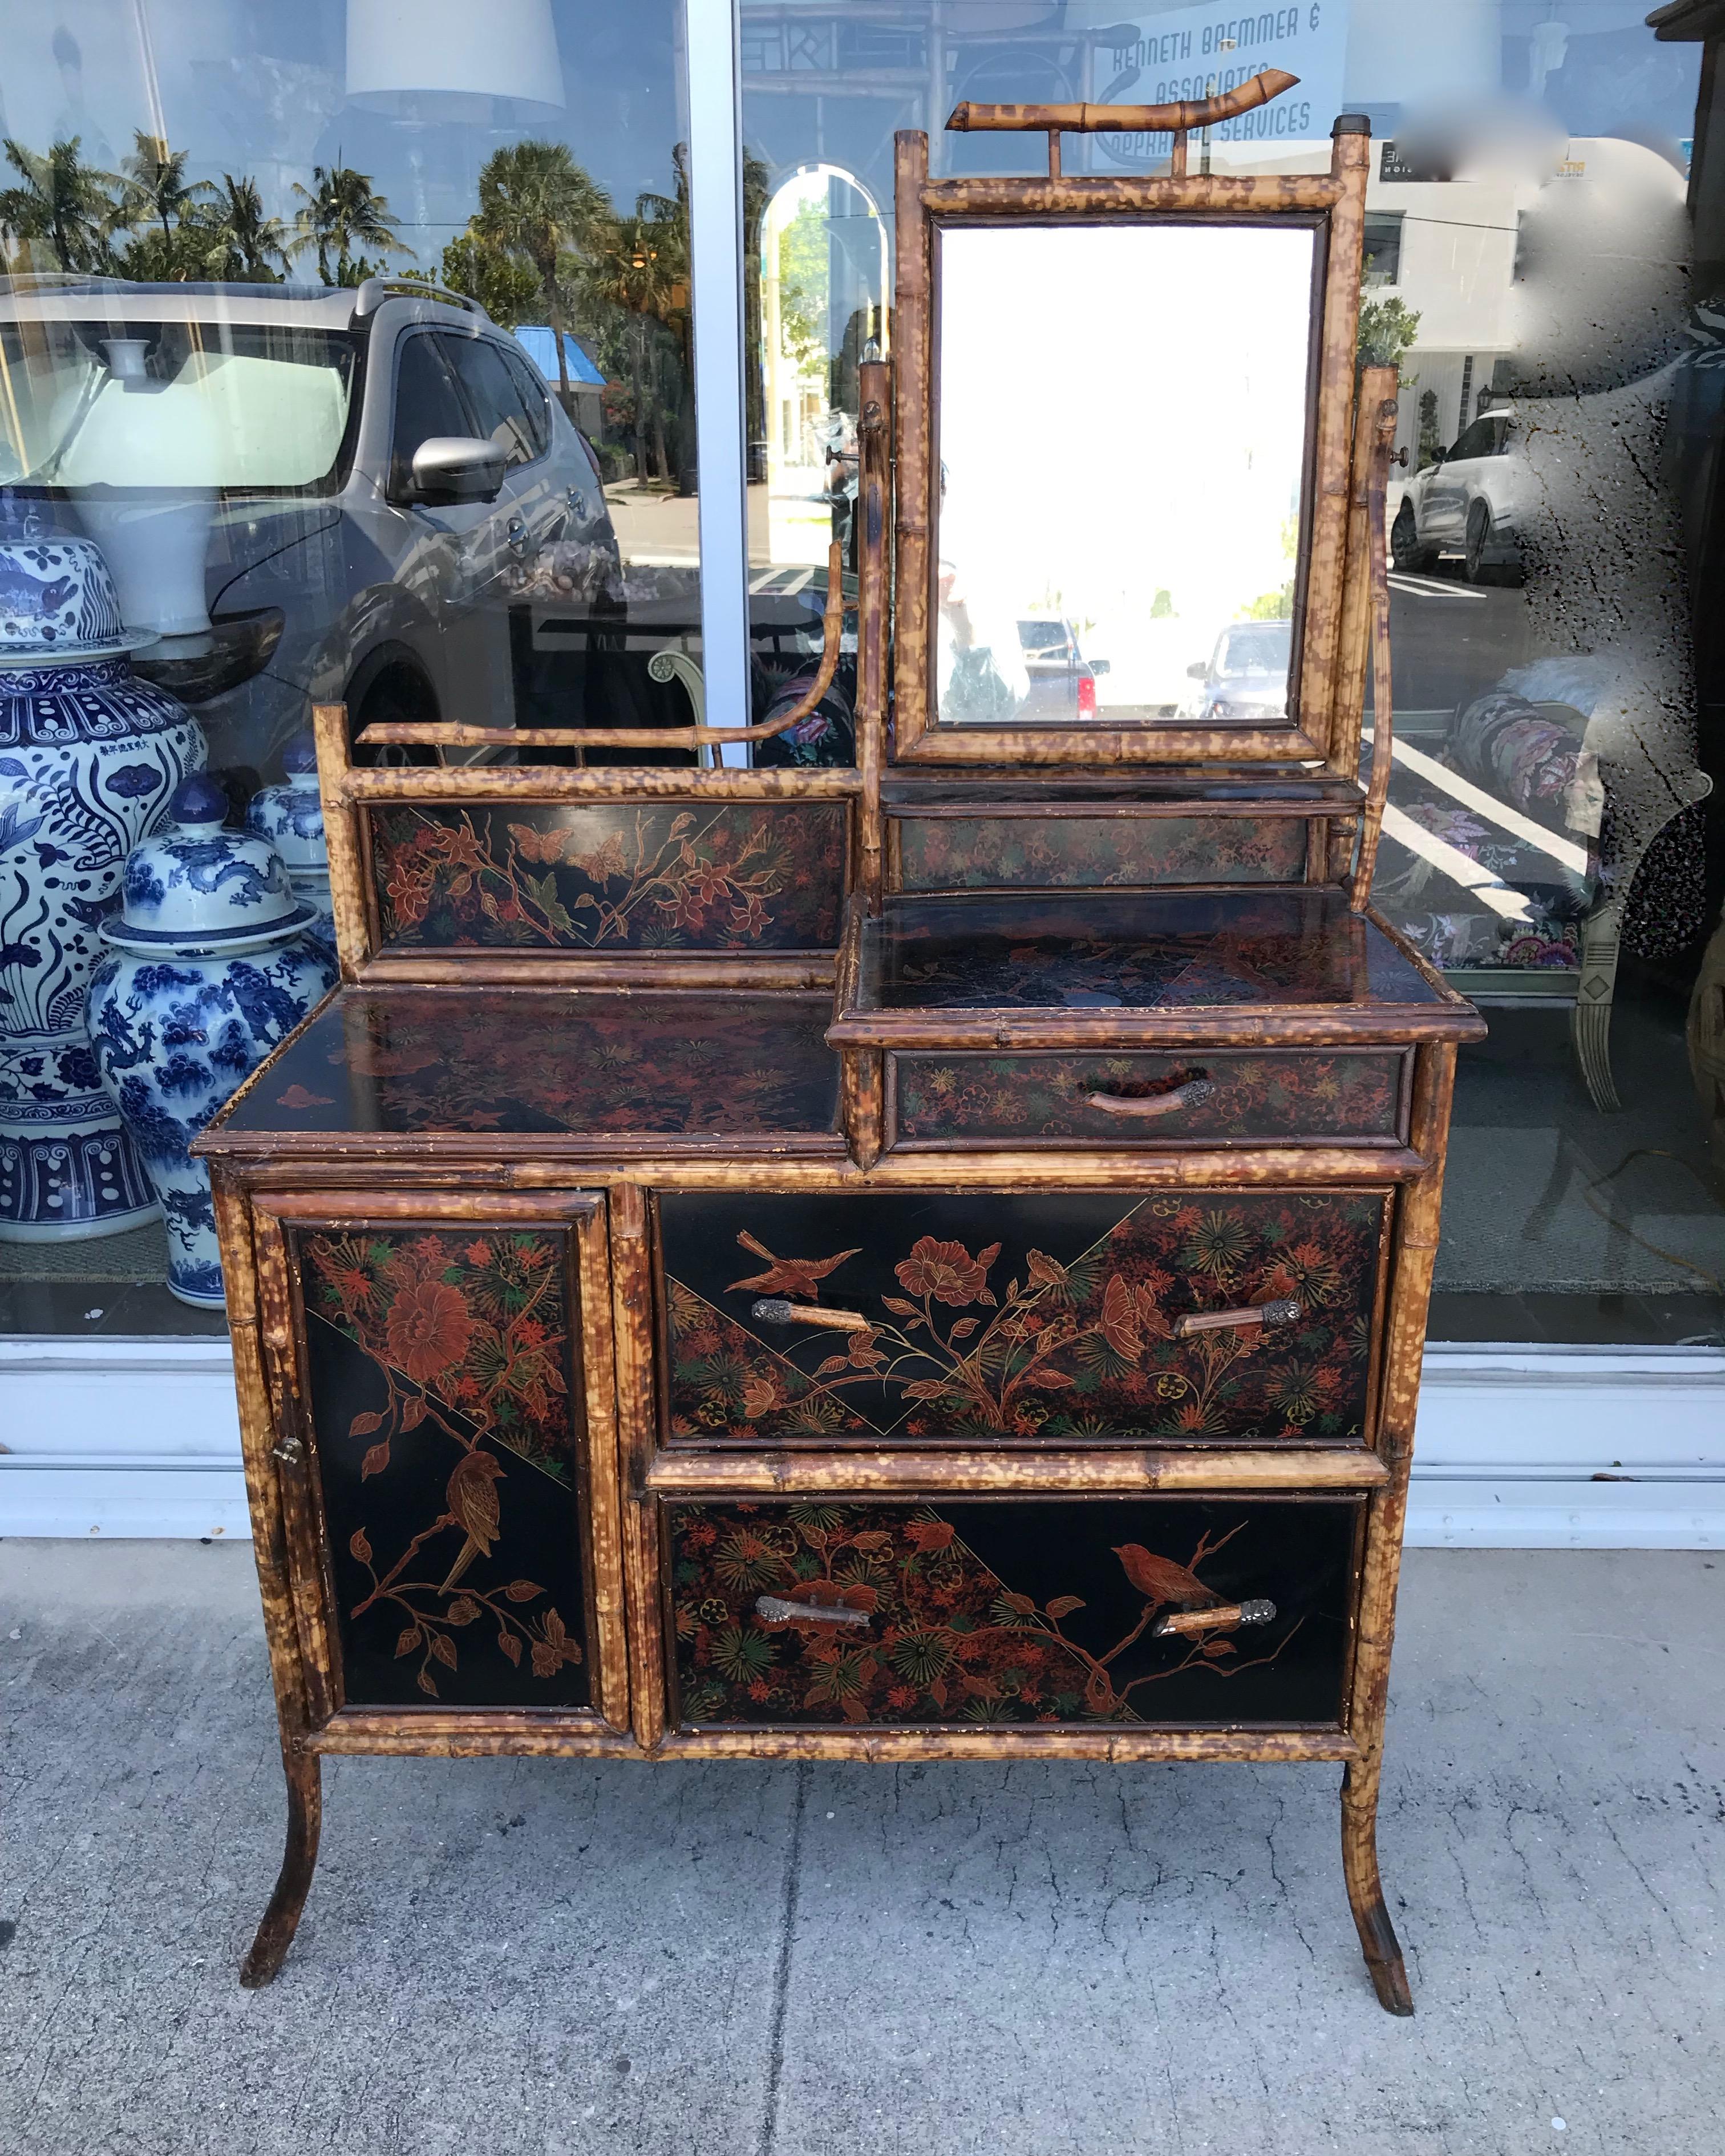 Unusual design, scale and form.
The dresser is dramatically and profusely decorated with figure of birds
and florals. It is exceptionally well detailed with unusual bamboo handles
and desirable 